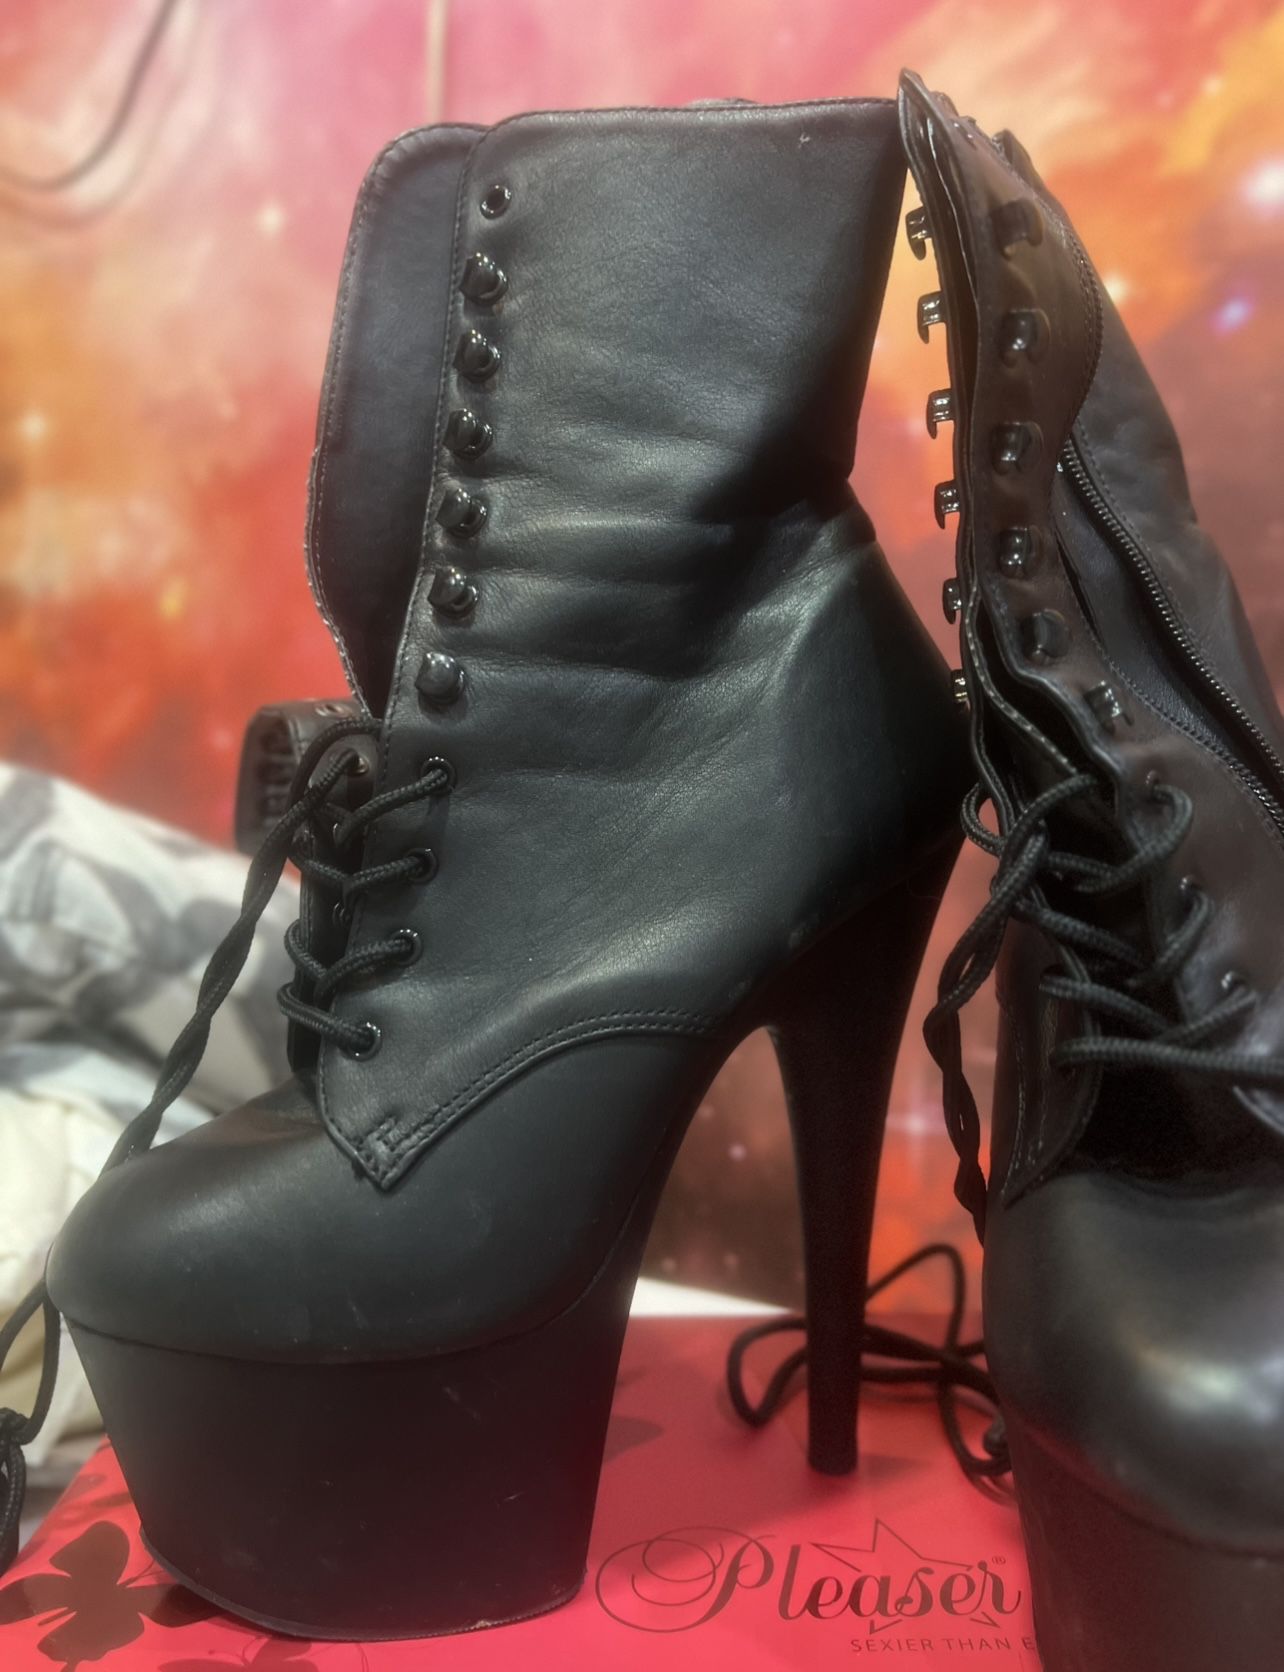 Black Lace Up Stripper Heels Ankle Booties Exotic Pole Dance Shoes